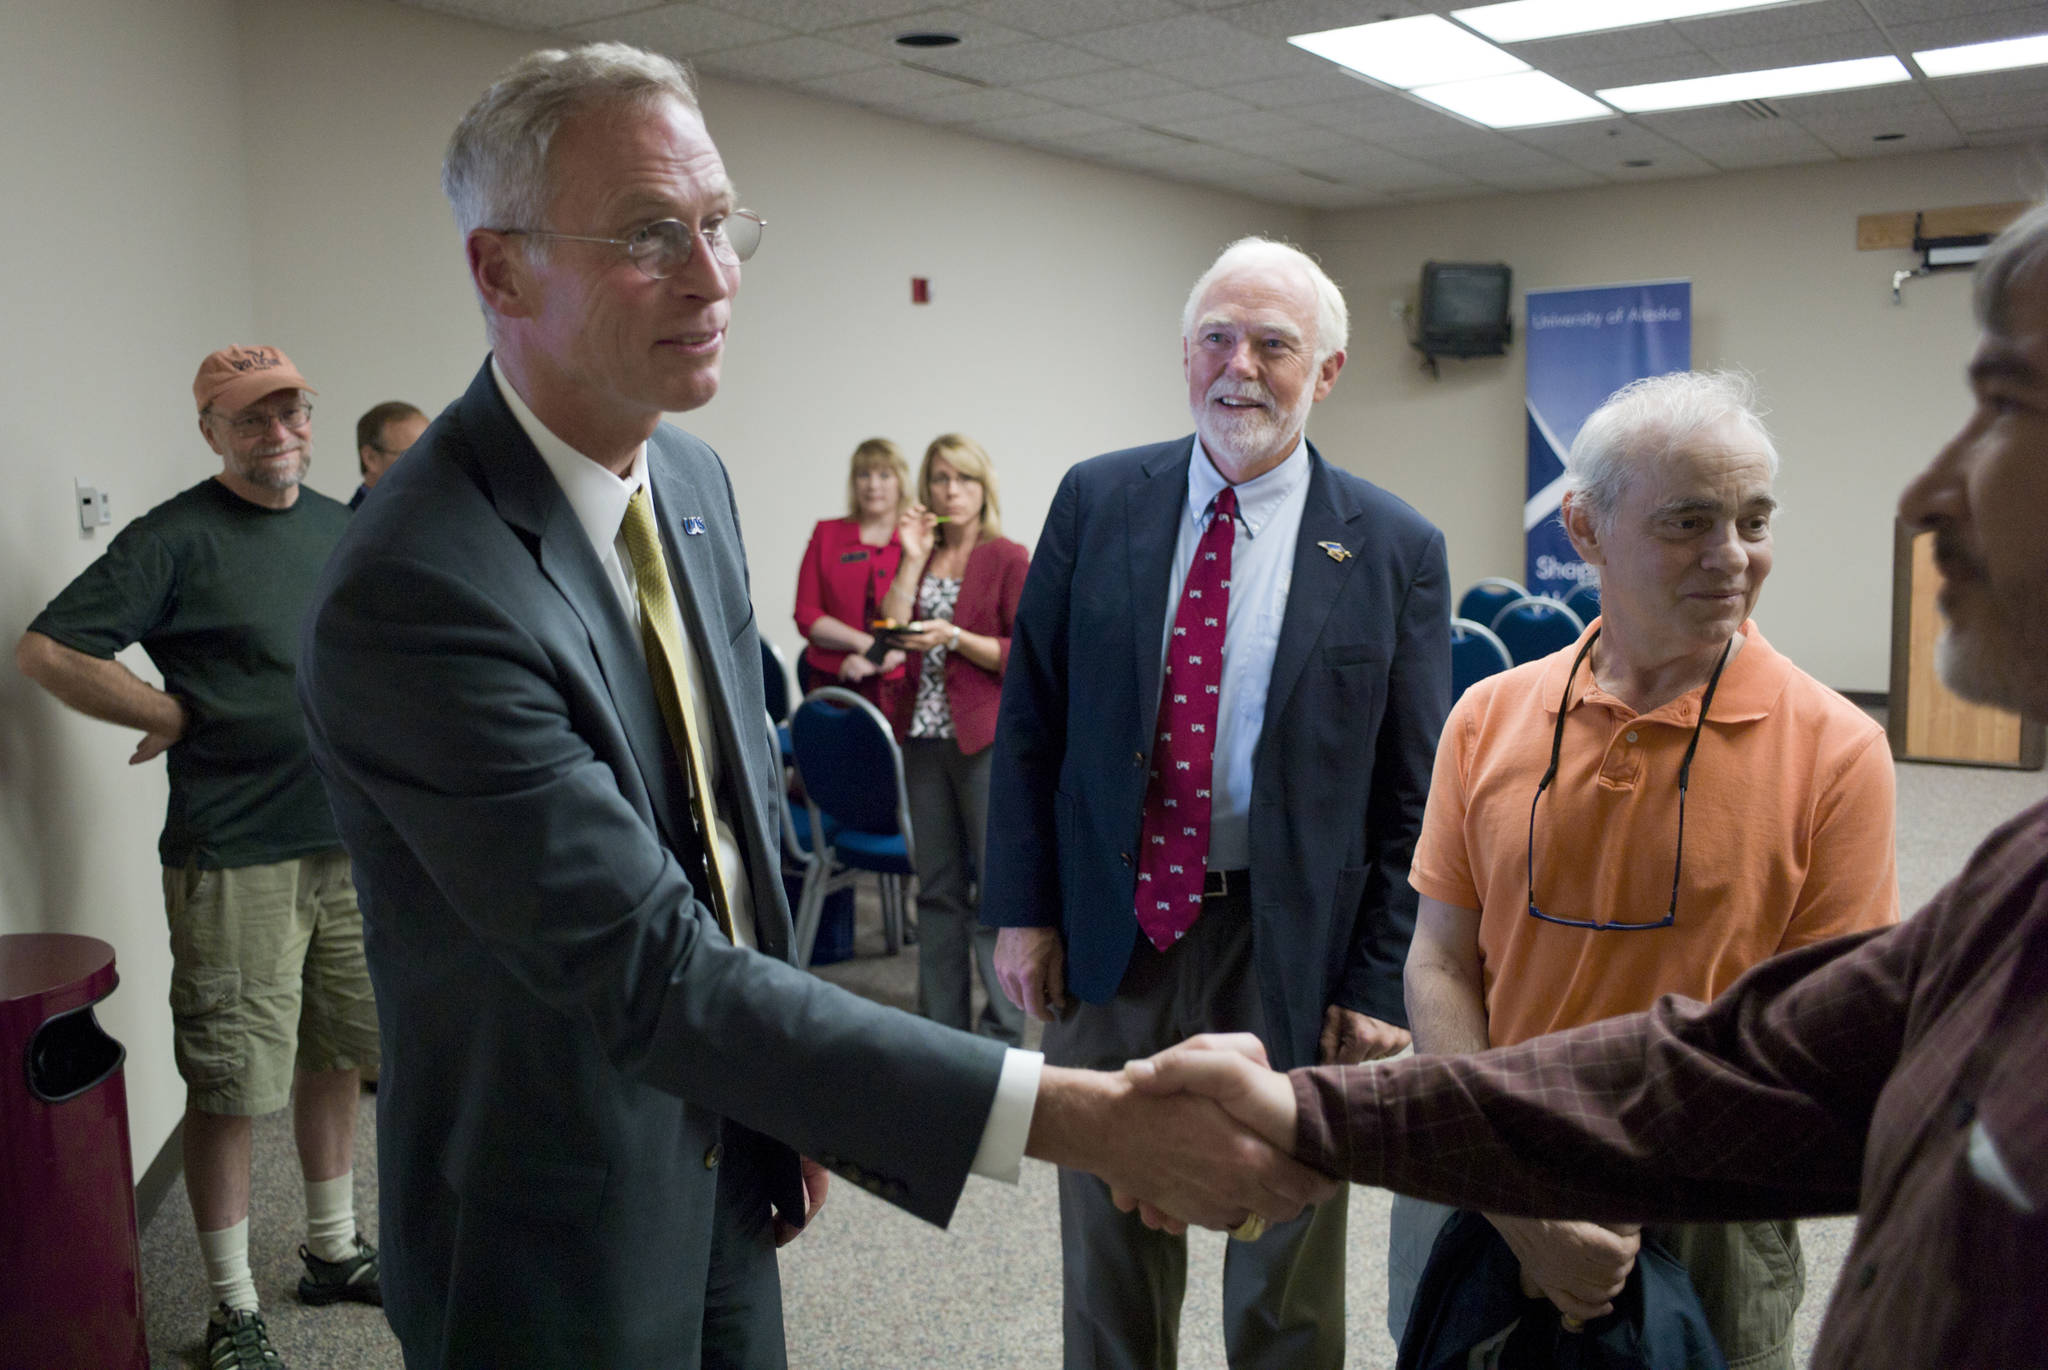 In this July 7, 2015 file photo, Jim Johnsen is greeted by Rep. Sam Kito, right, as then-new University of Alaska Southeast Chancellor Rick Caulfield, center, looks on during a gathering at Centennial Hall. Caulfield announced Friday he will be retiring. (Michael Penn | Juneau Empire File)